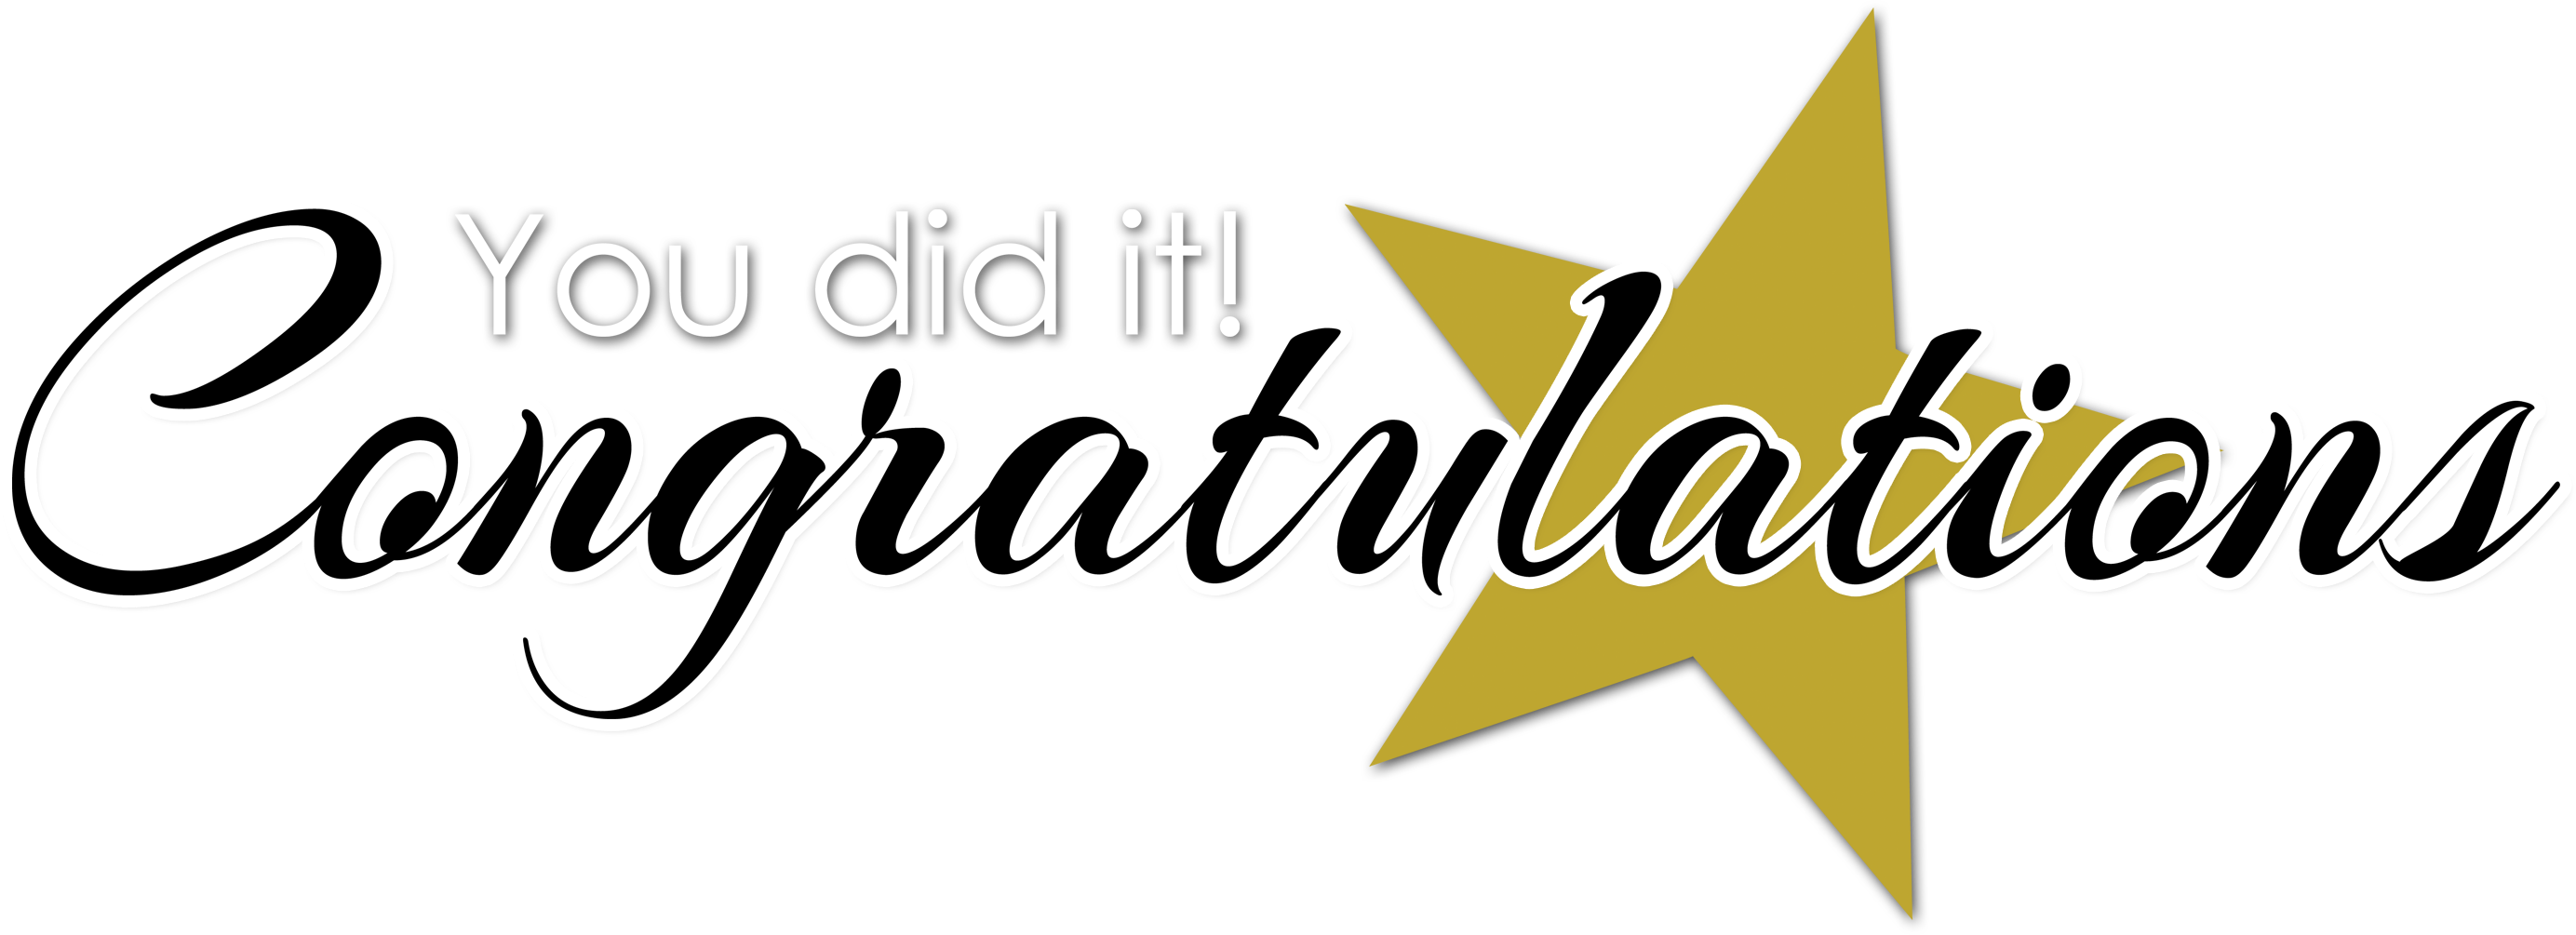 You Did It Png Hdpng.com 2768 - You Did It, Transparent background PNG HD thumbnail